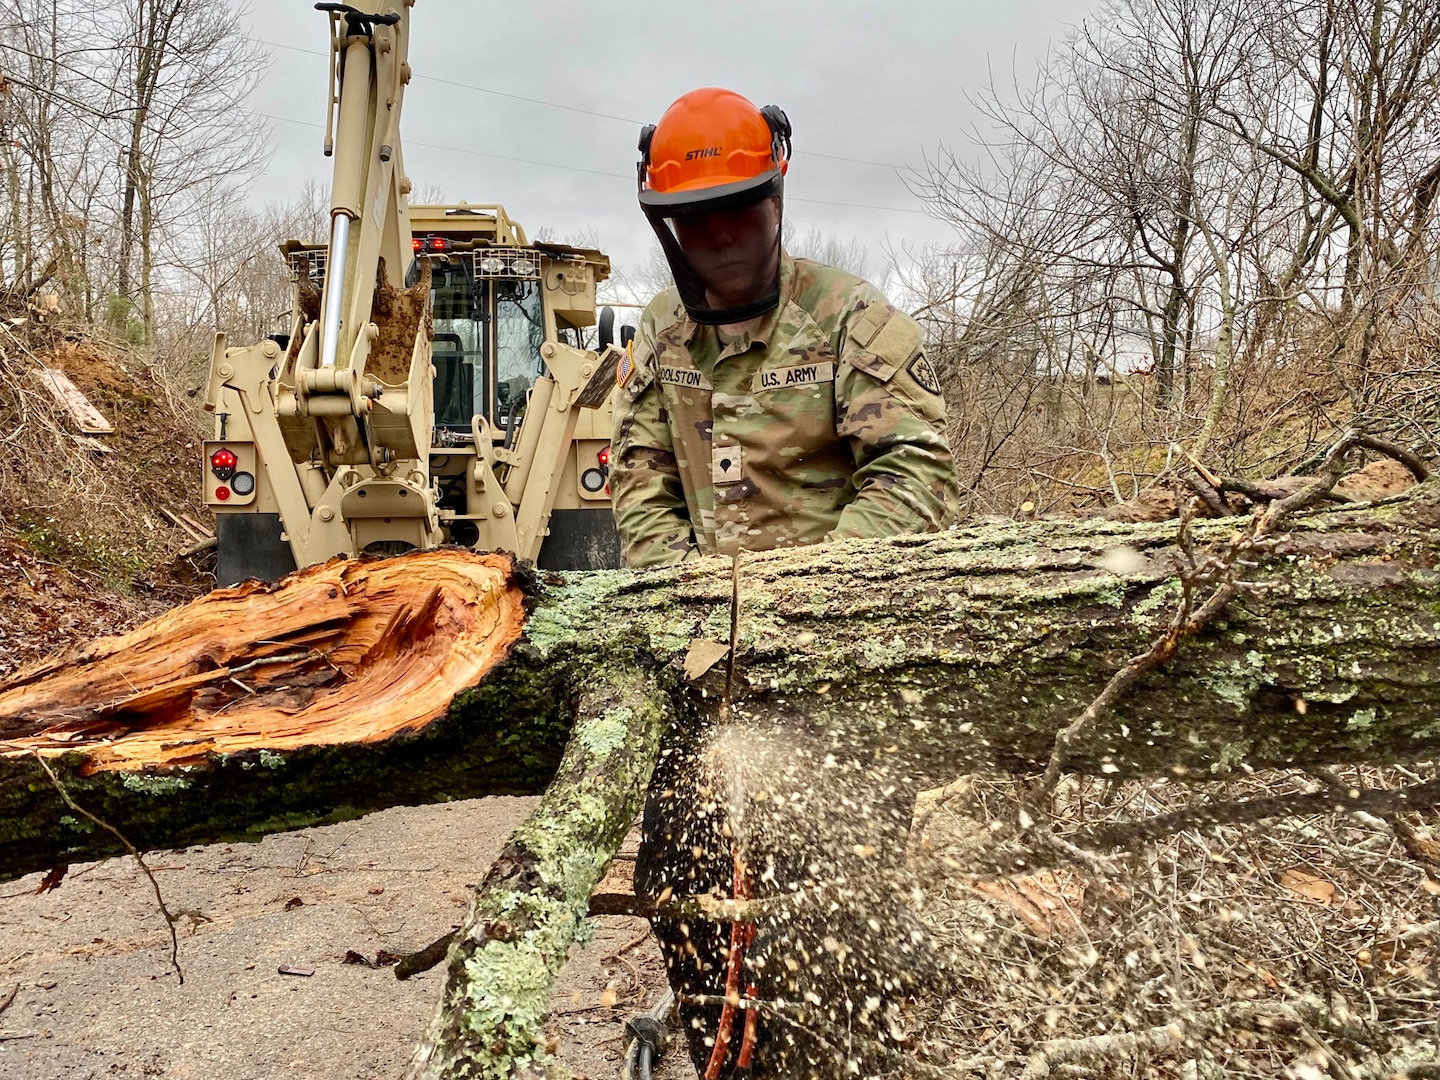 Spc. Dakotah Woolston, with the Kentucky National Guard's 2061st Multi-Role Bridge Company, works to clear a tree from a road in Dawson Springs, Kentucky, Dec. 18, 2021.